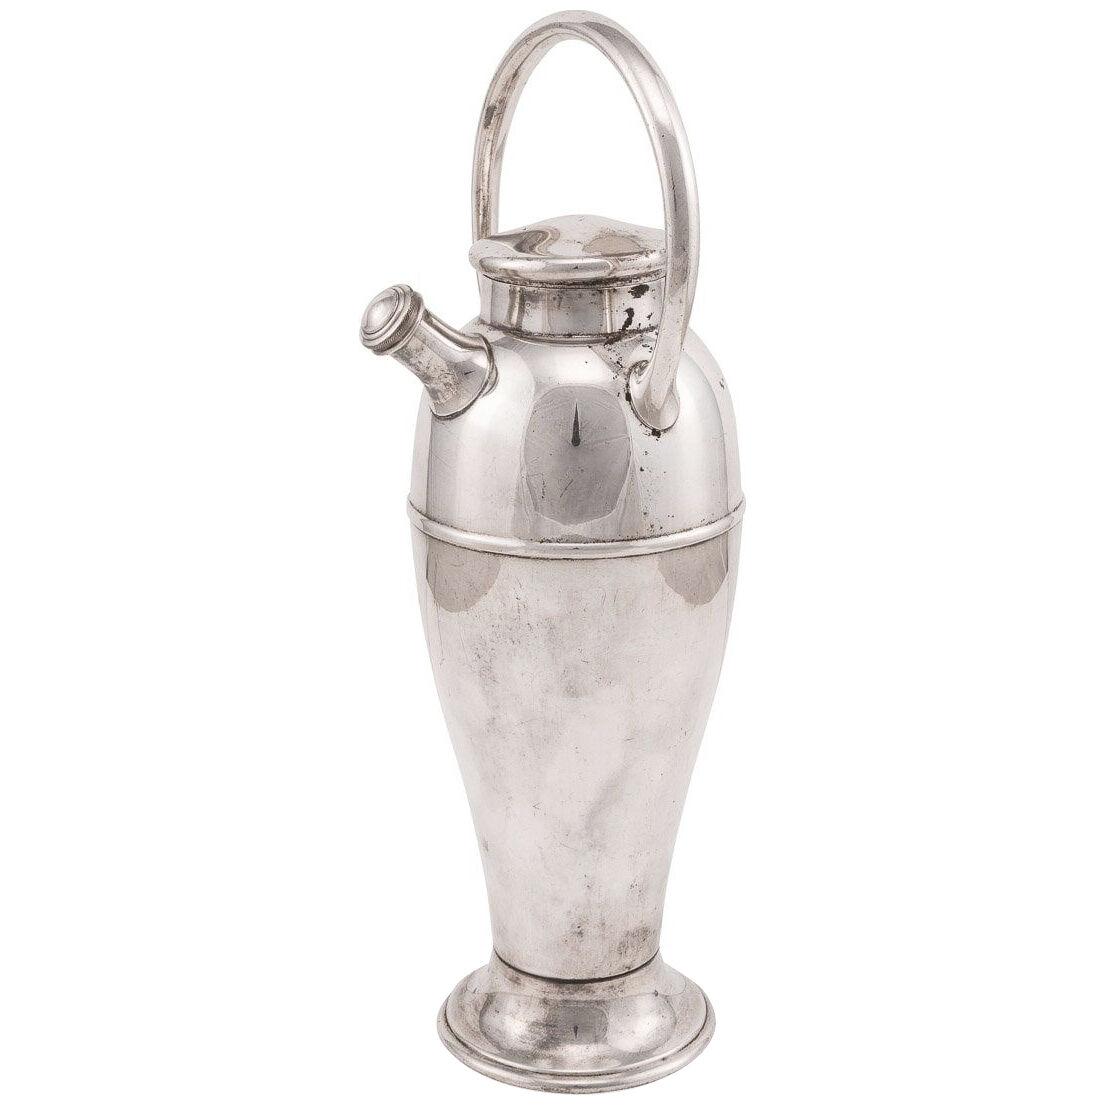 20thC American Silver Plated "Milk Churn" Cocktail Shaker c.1940